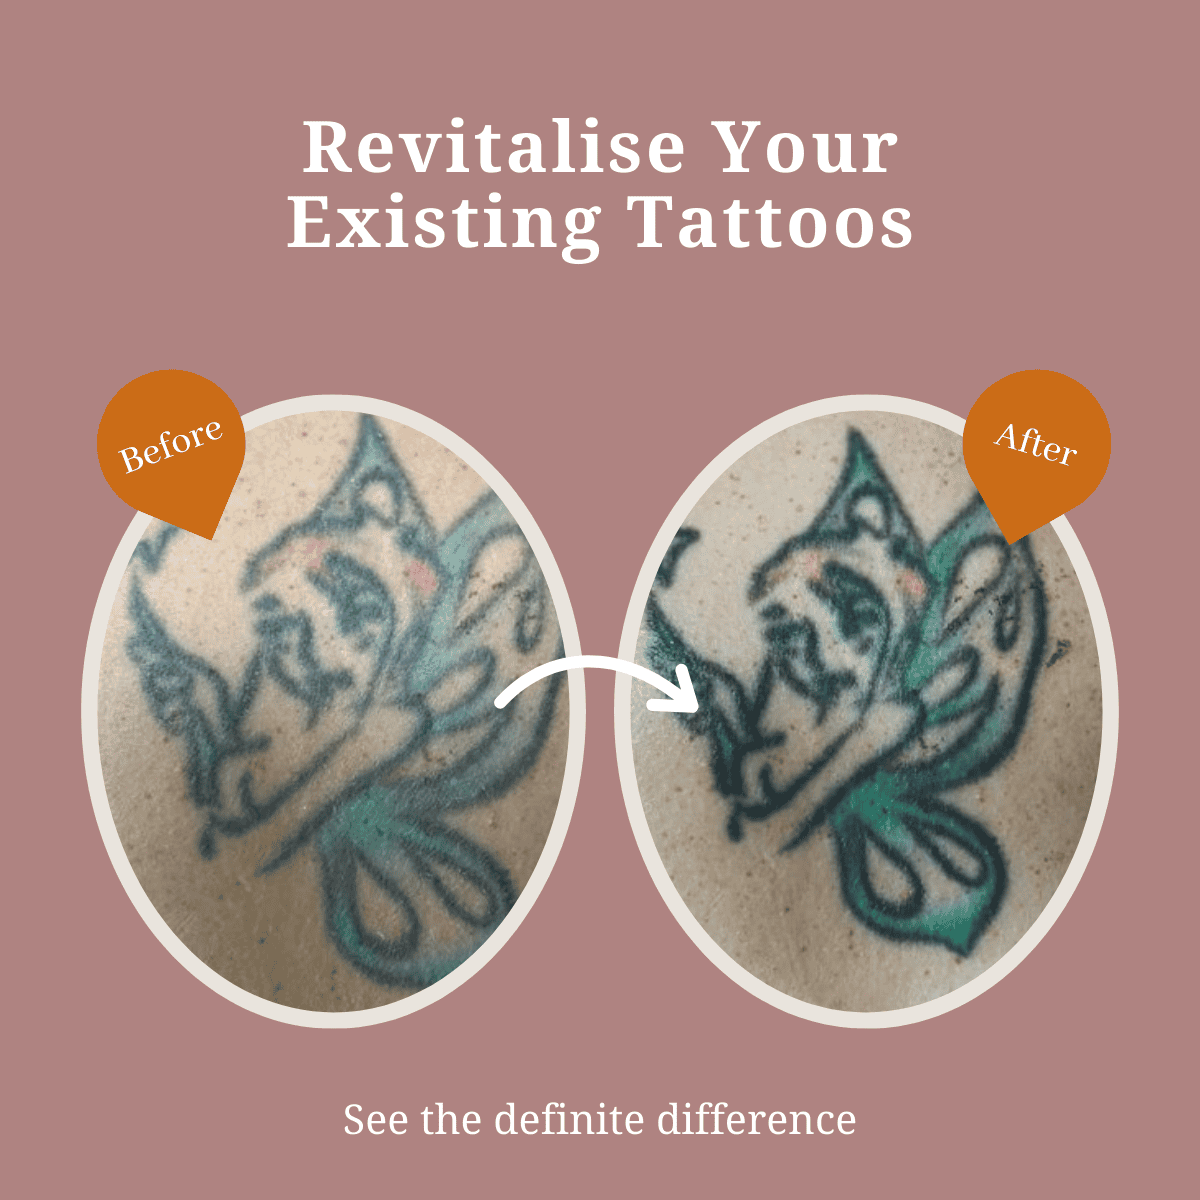 Tattoo RefreshINK: Revitalise Your Existing Tattoos